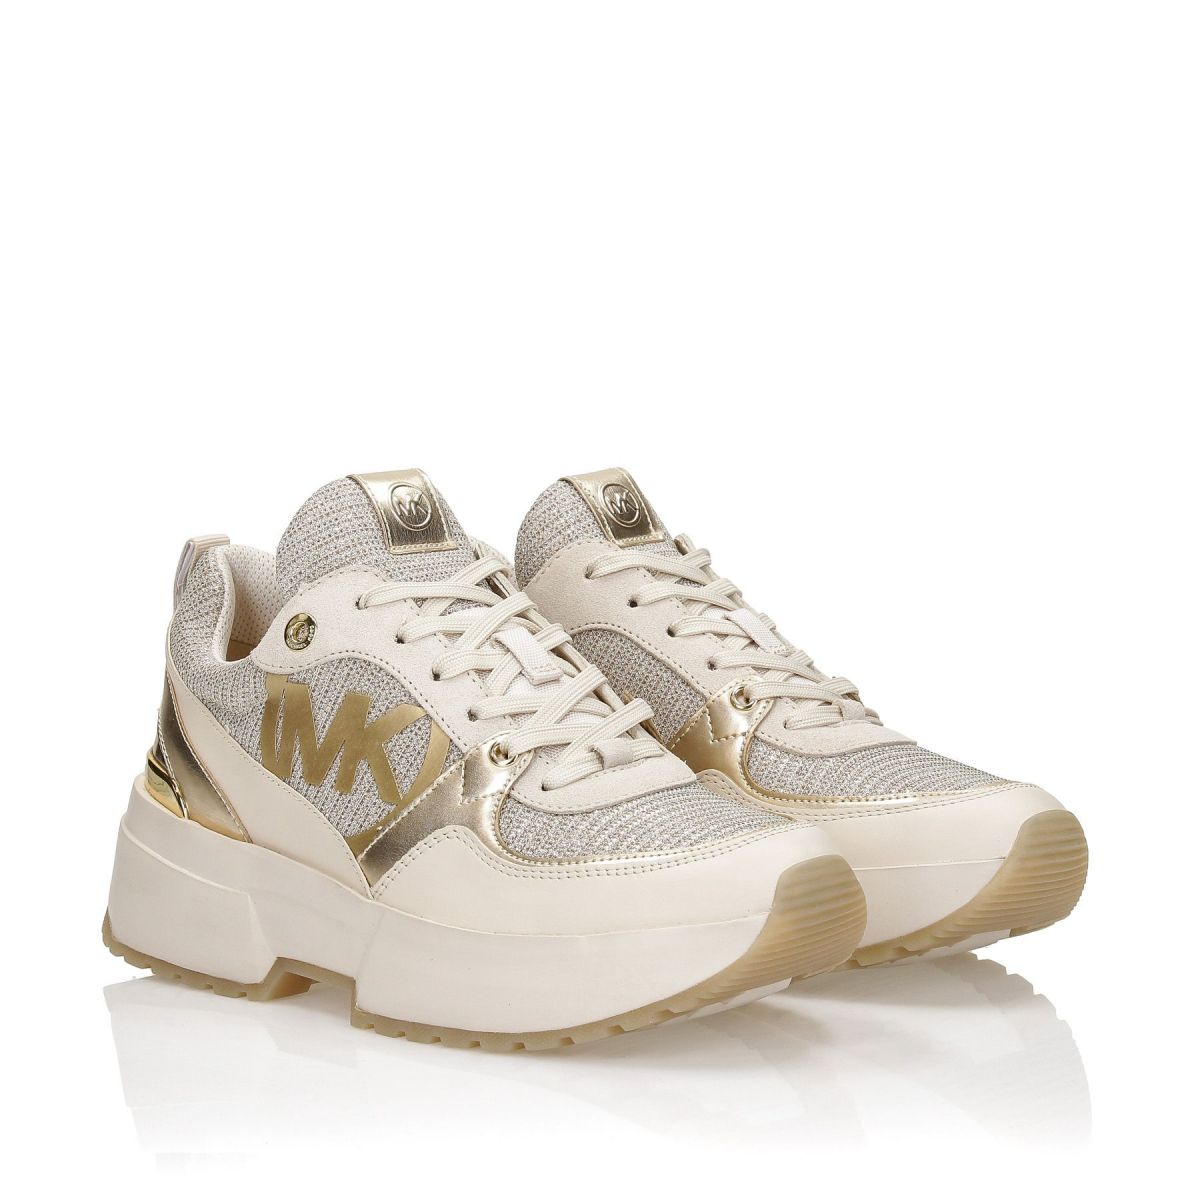 Michael Kors Sneakers Trainer Gold 43R0BLFED740-ORO-020